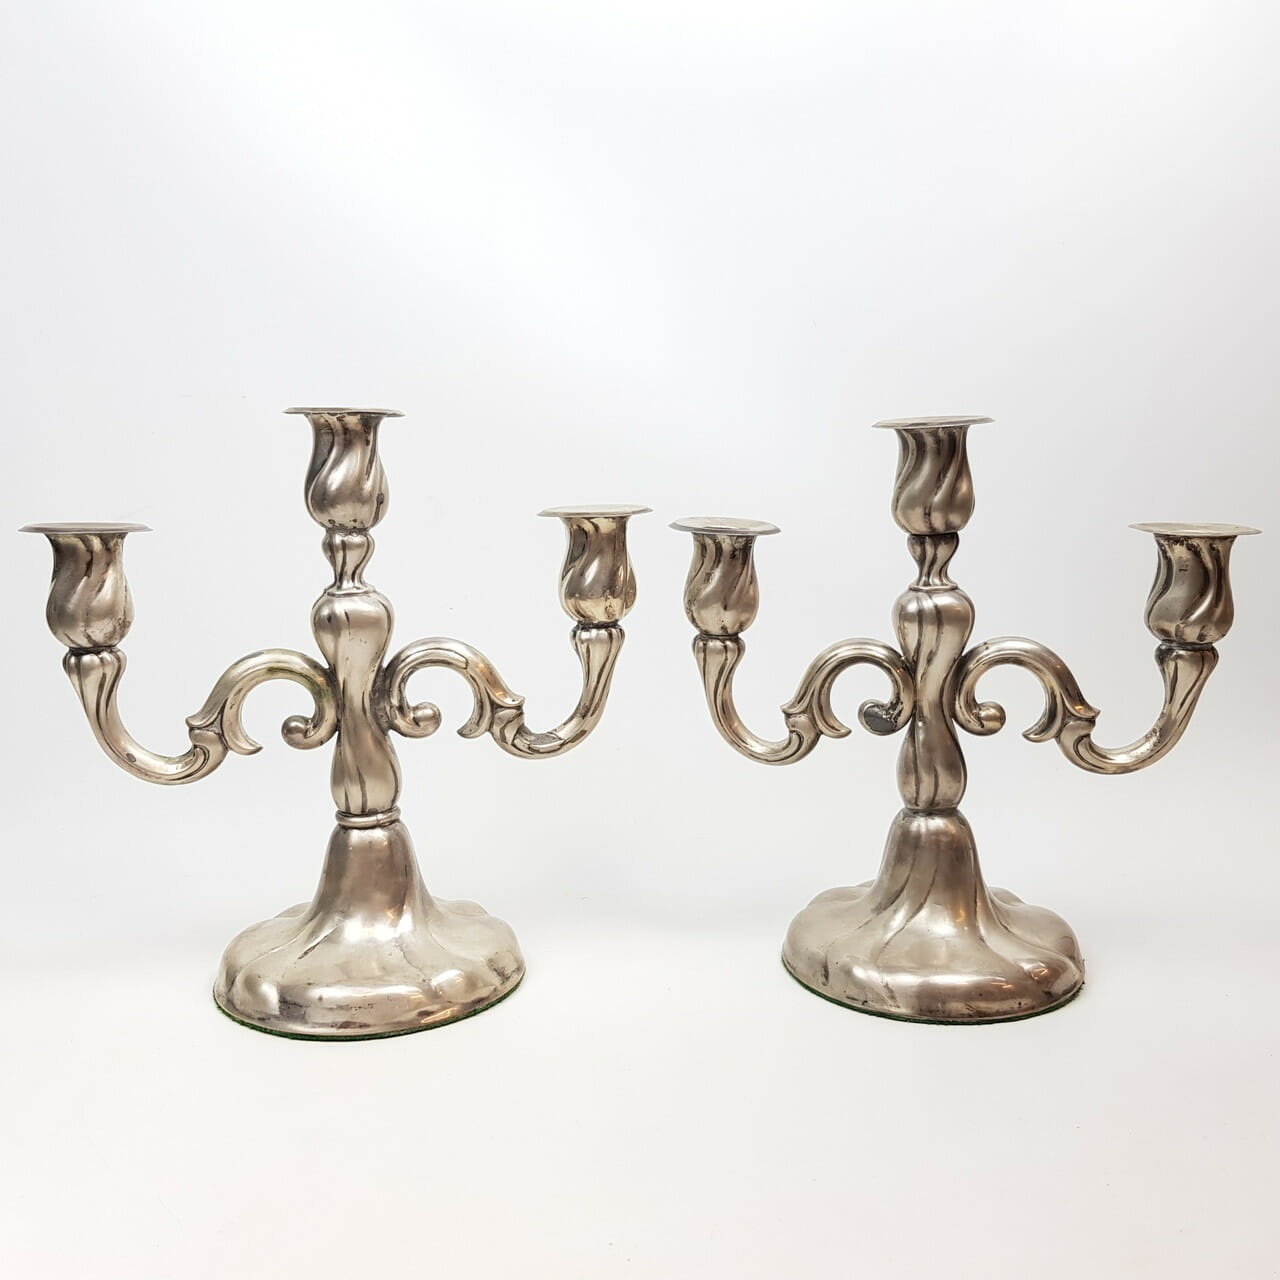 PAIR OF GERMAN 835 SILVER CANDELABRAS (A/F) #46783